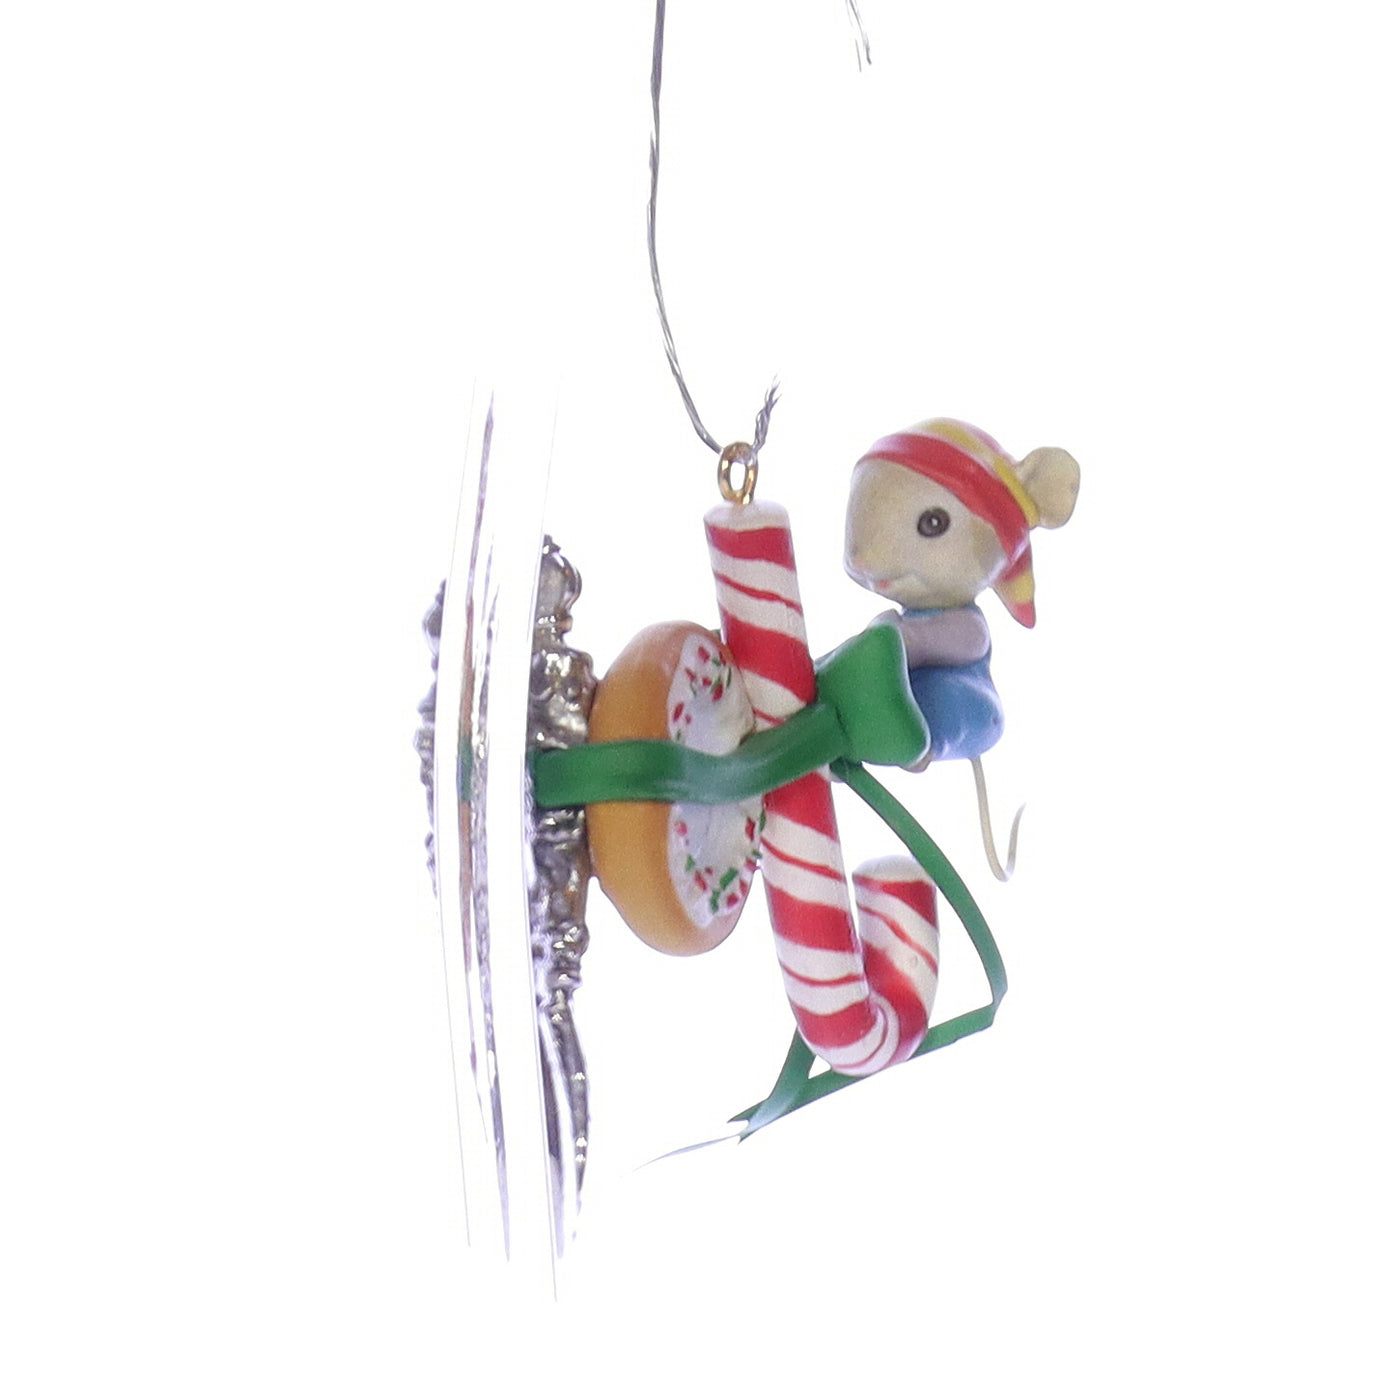 Enesco_Treasury_of_Christmas_Ornaments_830488_Tie-dings_of_Joy_Mouse_Ornament_1991 Front Right View